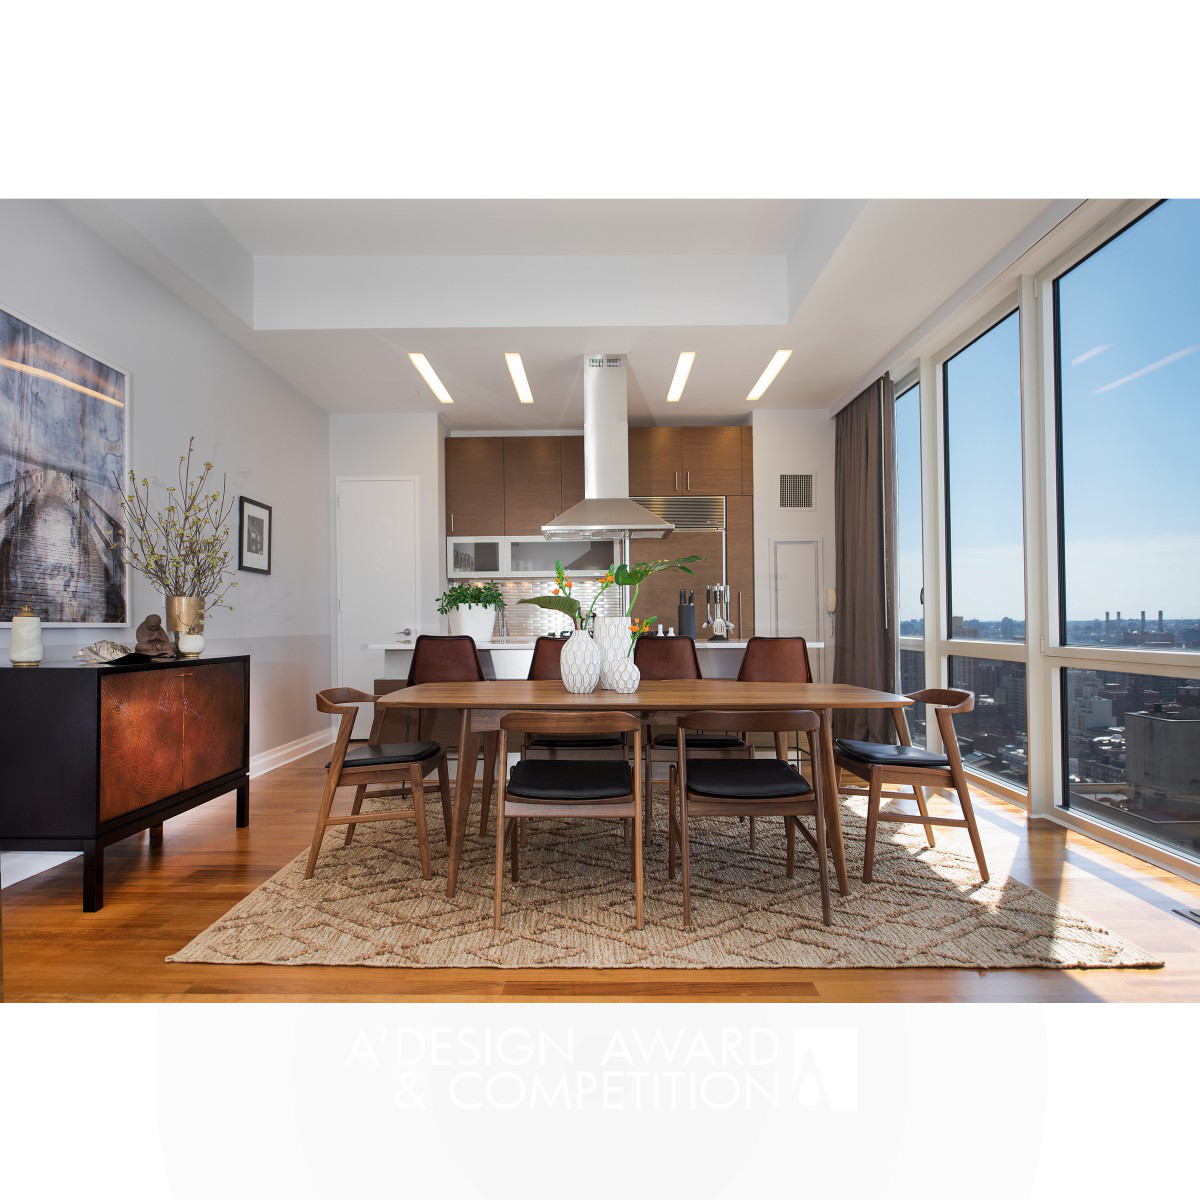 Penthouse Living <b>Residential Apartment